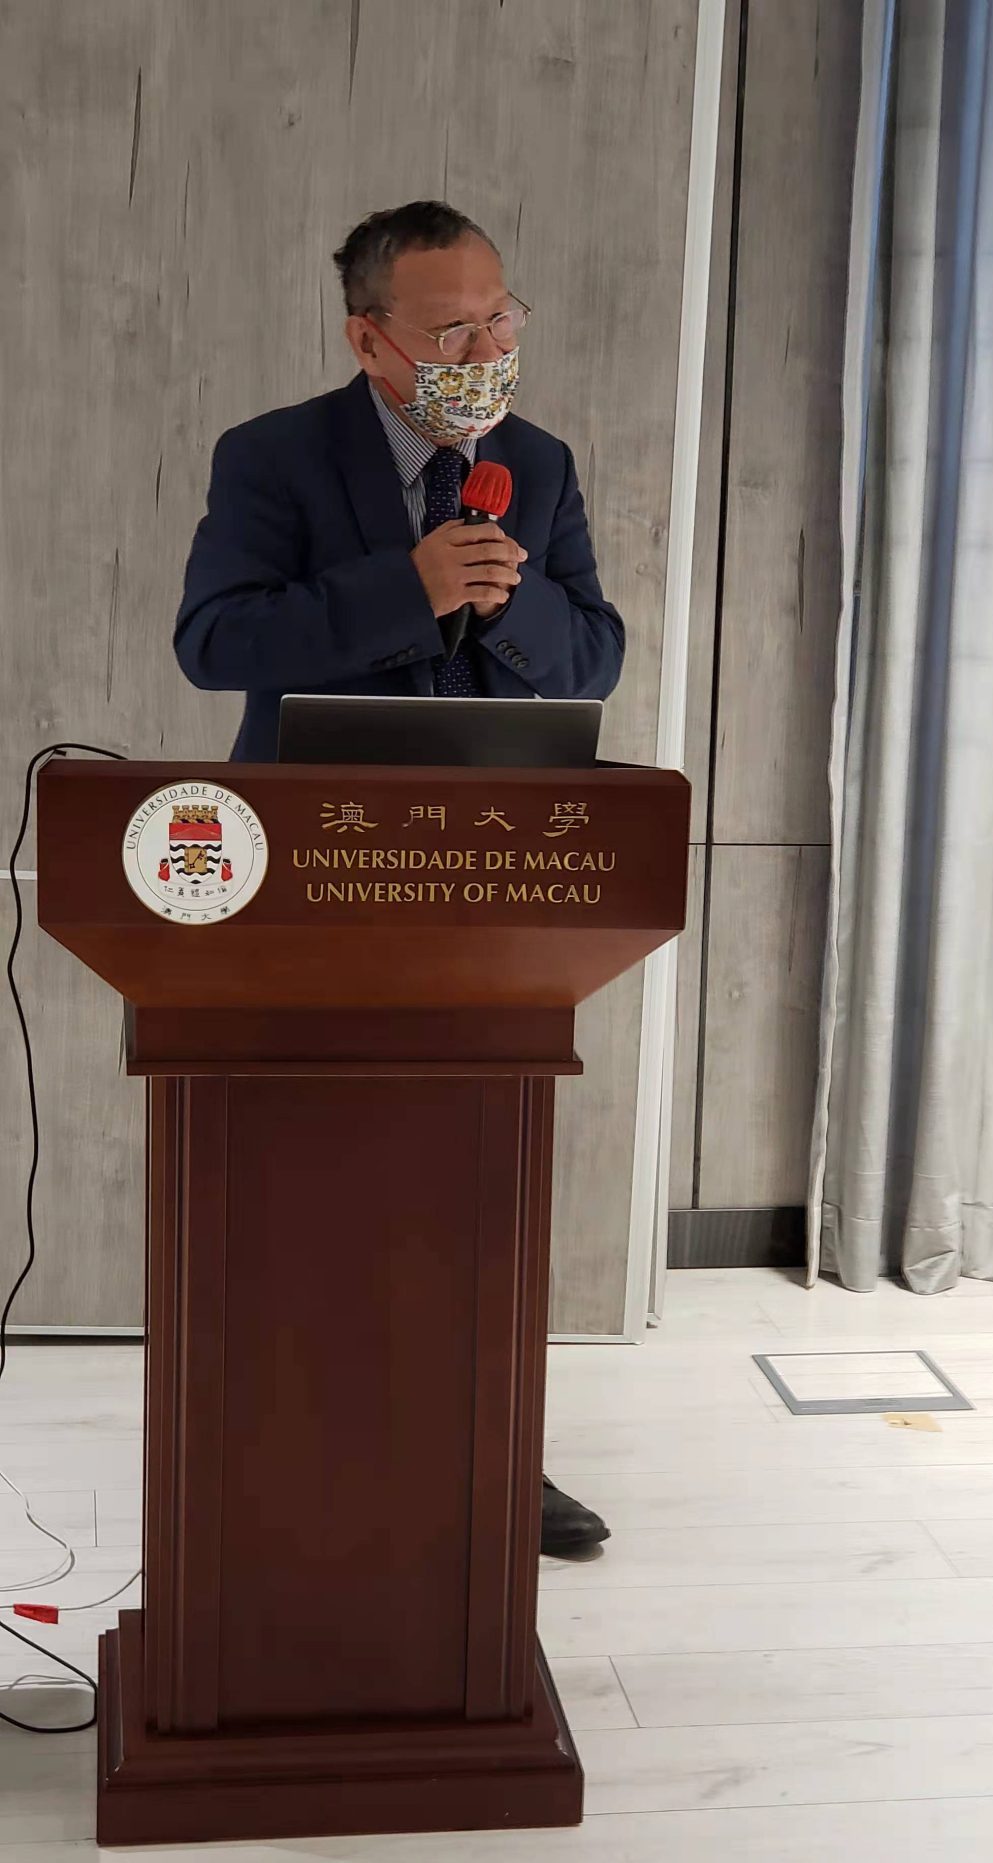 Prof. Yen was giving a speech about the Ceremony of Cooperation